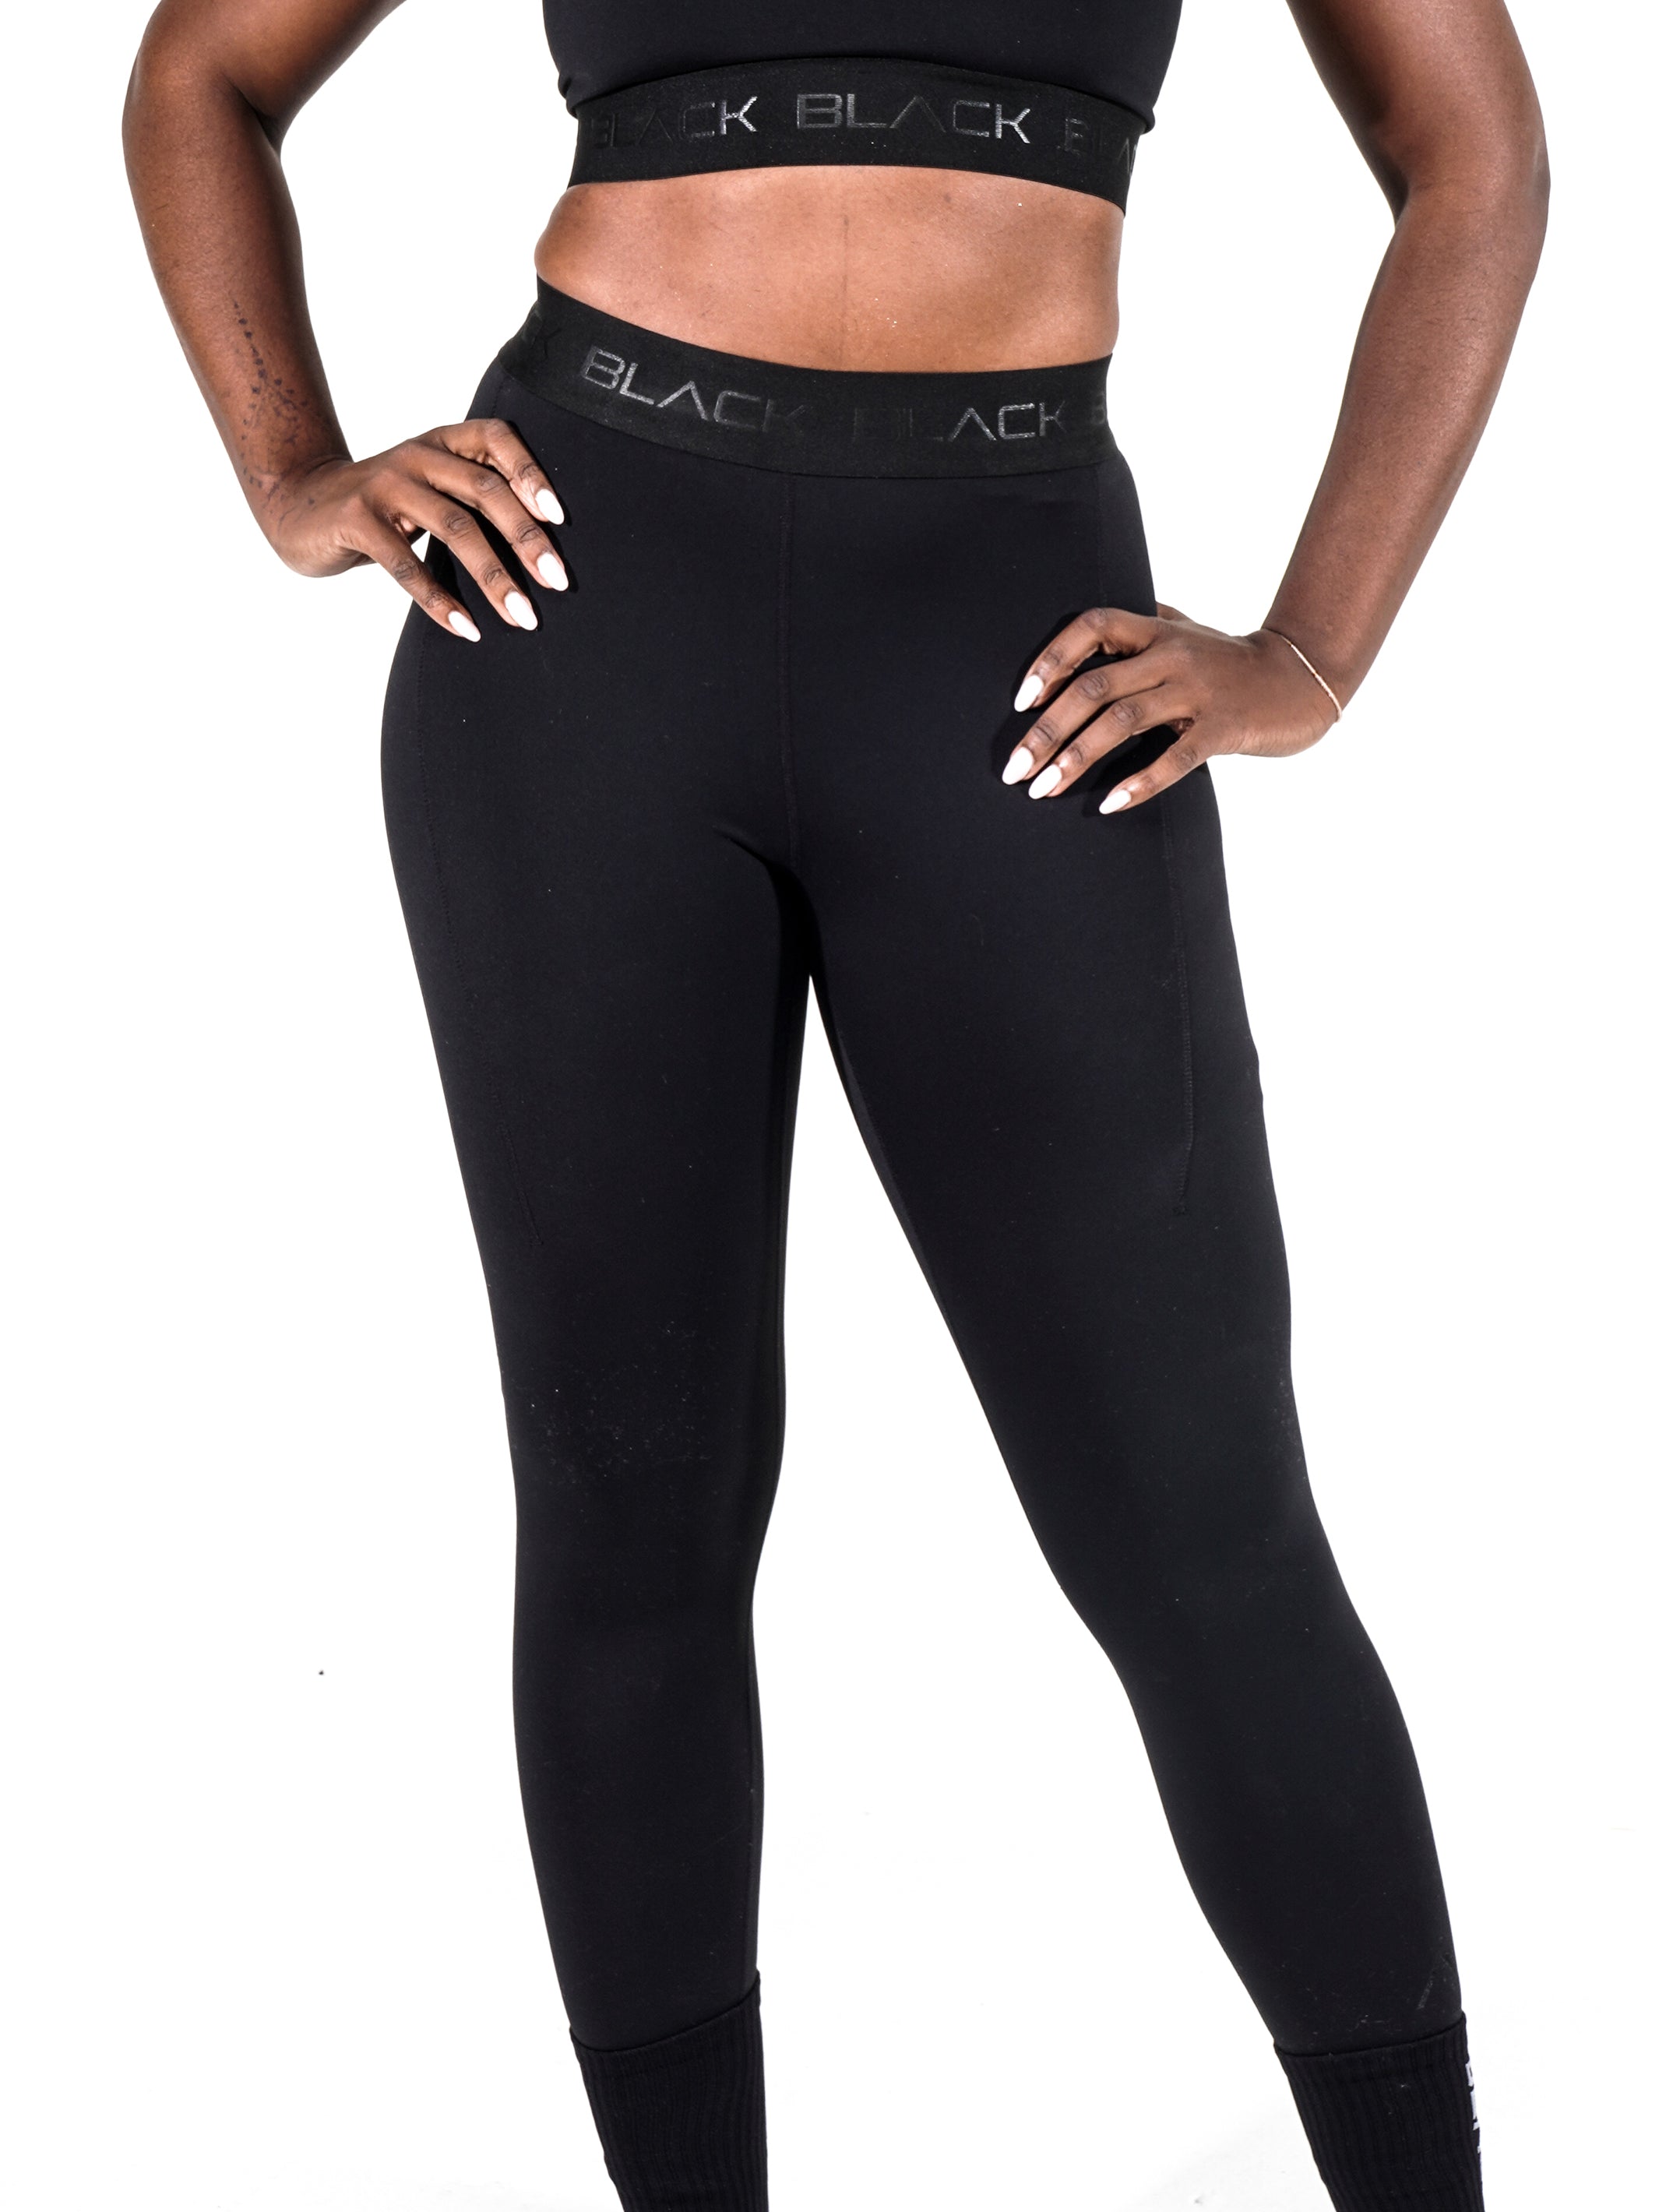 Women's Black Banded Tights